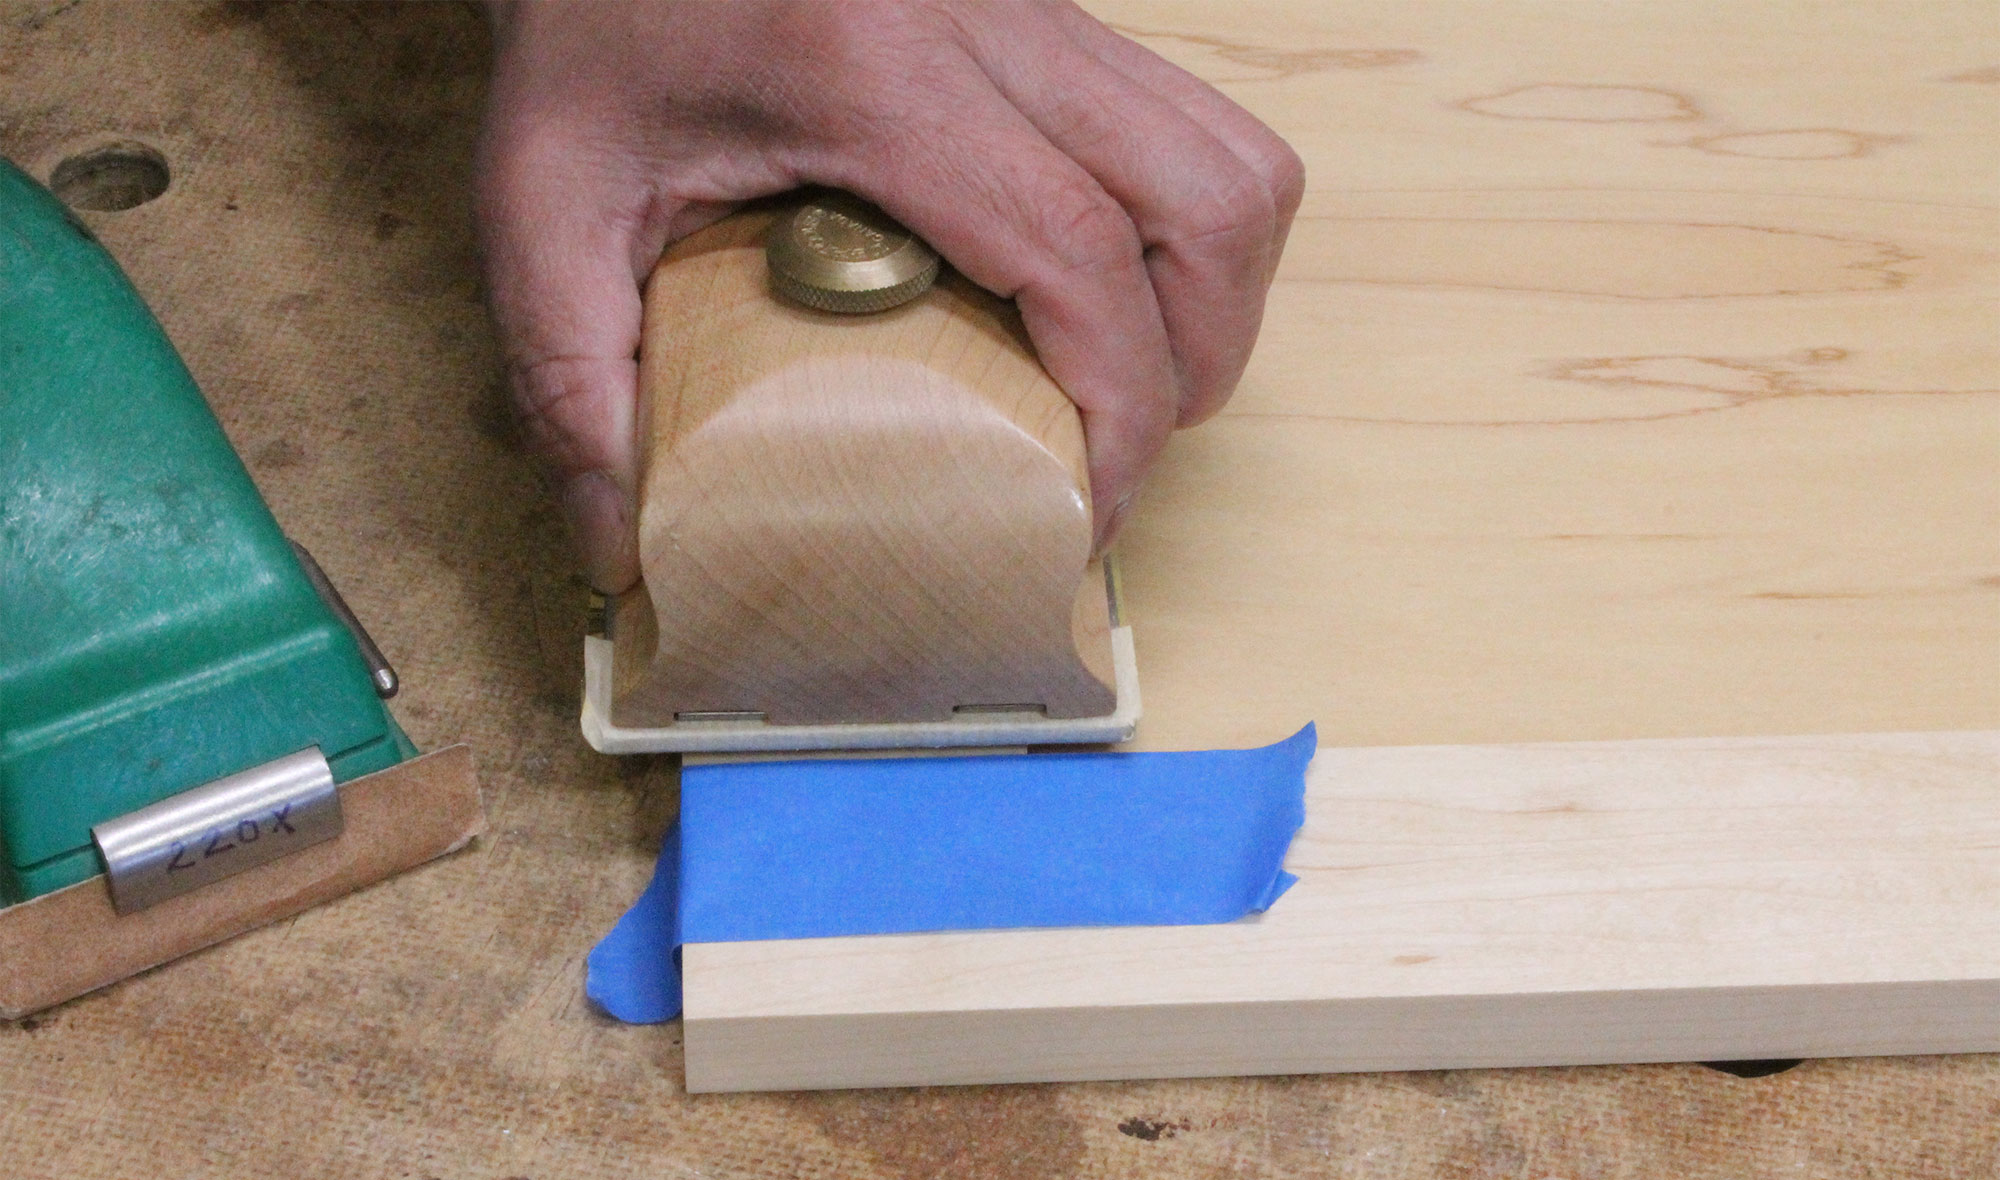 Using tape to prevent sanding scratches.